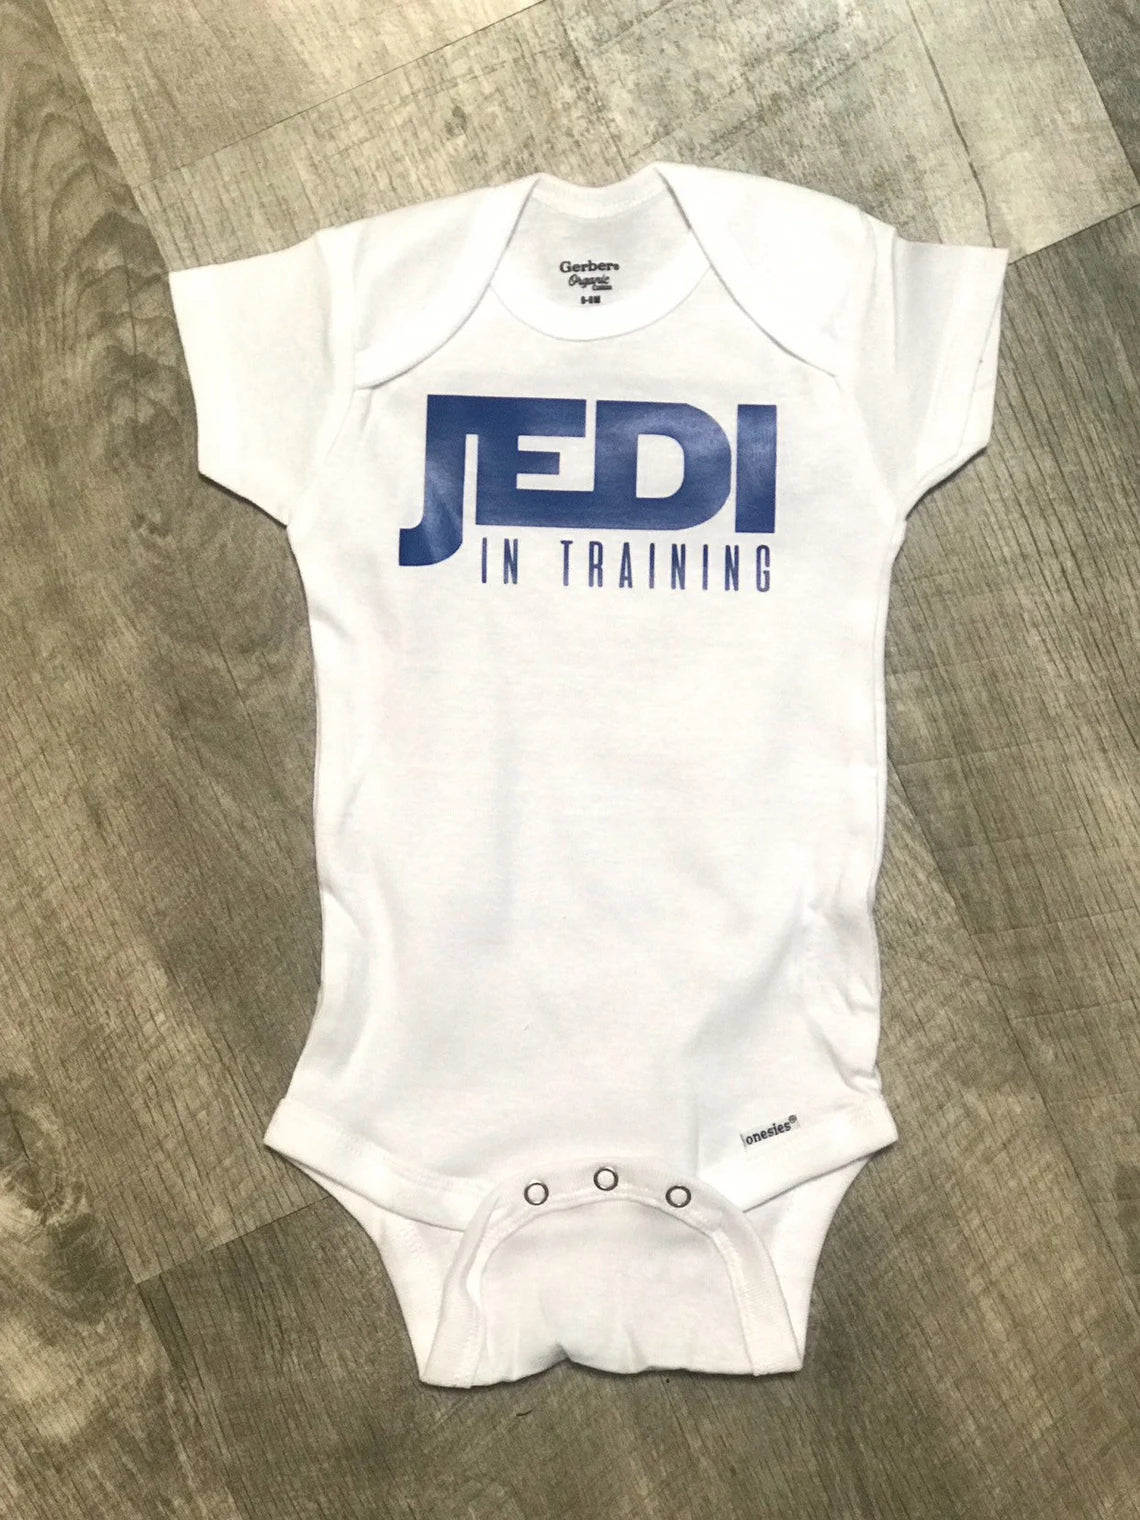 Baby Onesie Bodysuit Baby gift Baby shower Infant Baby Clothing Star Wars Jedi In Training Coming Home Outfit